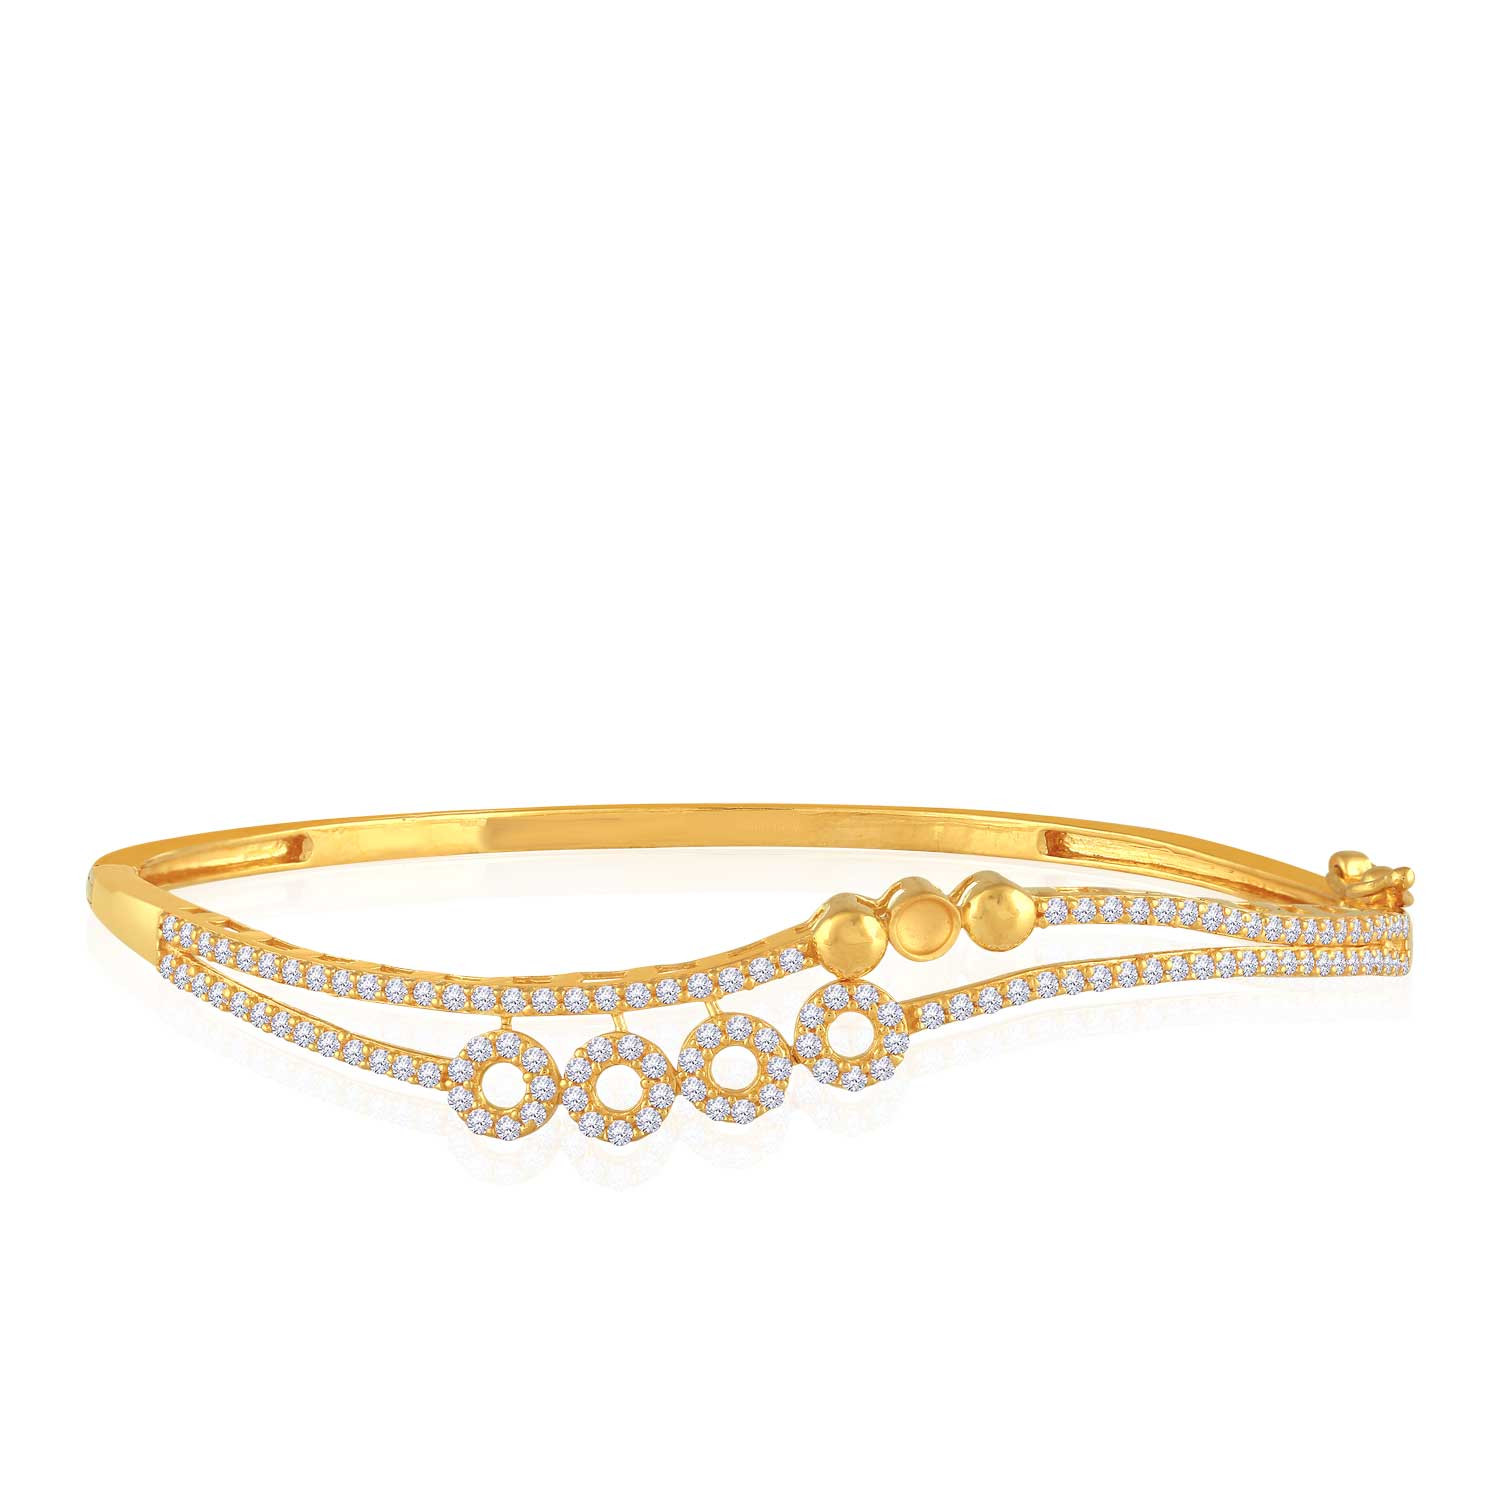 Daily Use Gold Bangles Designs, Lightweight bangles, Office wear bangles